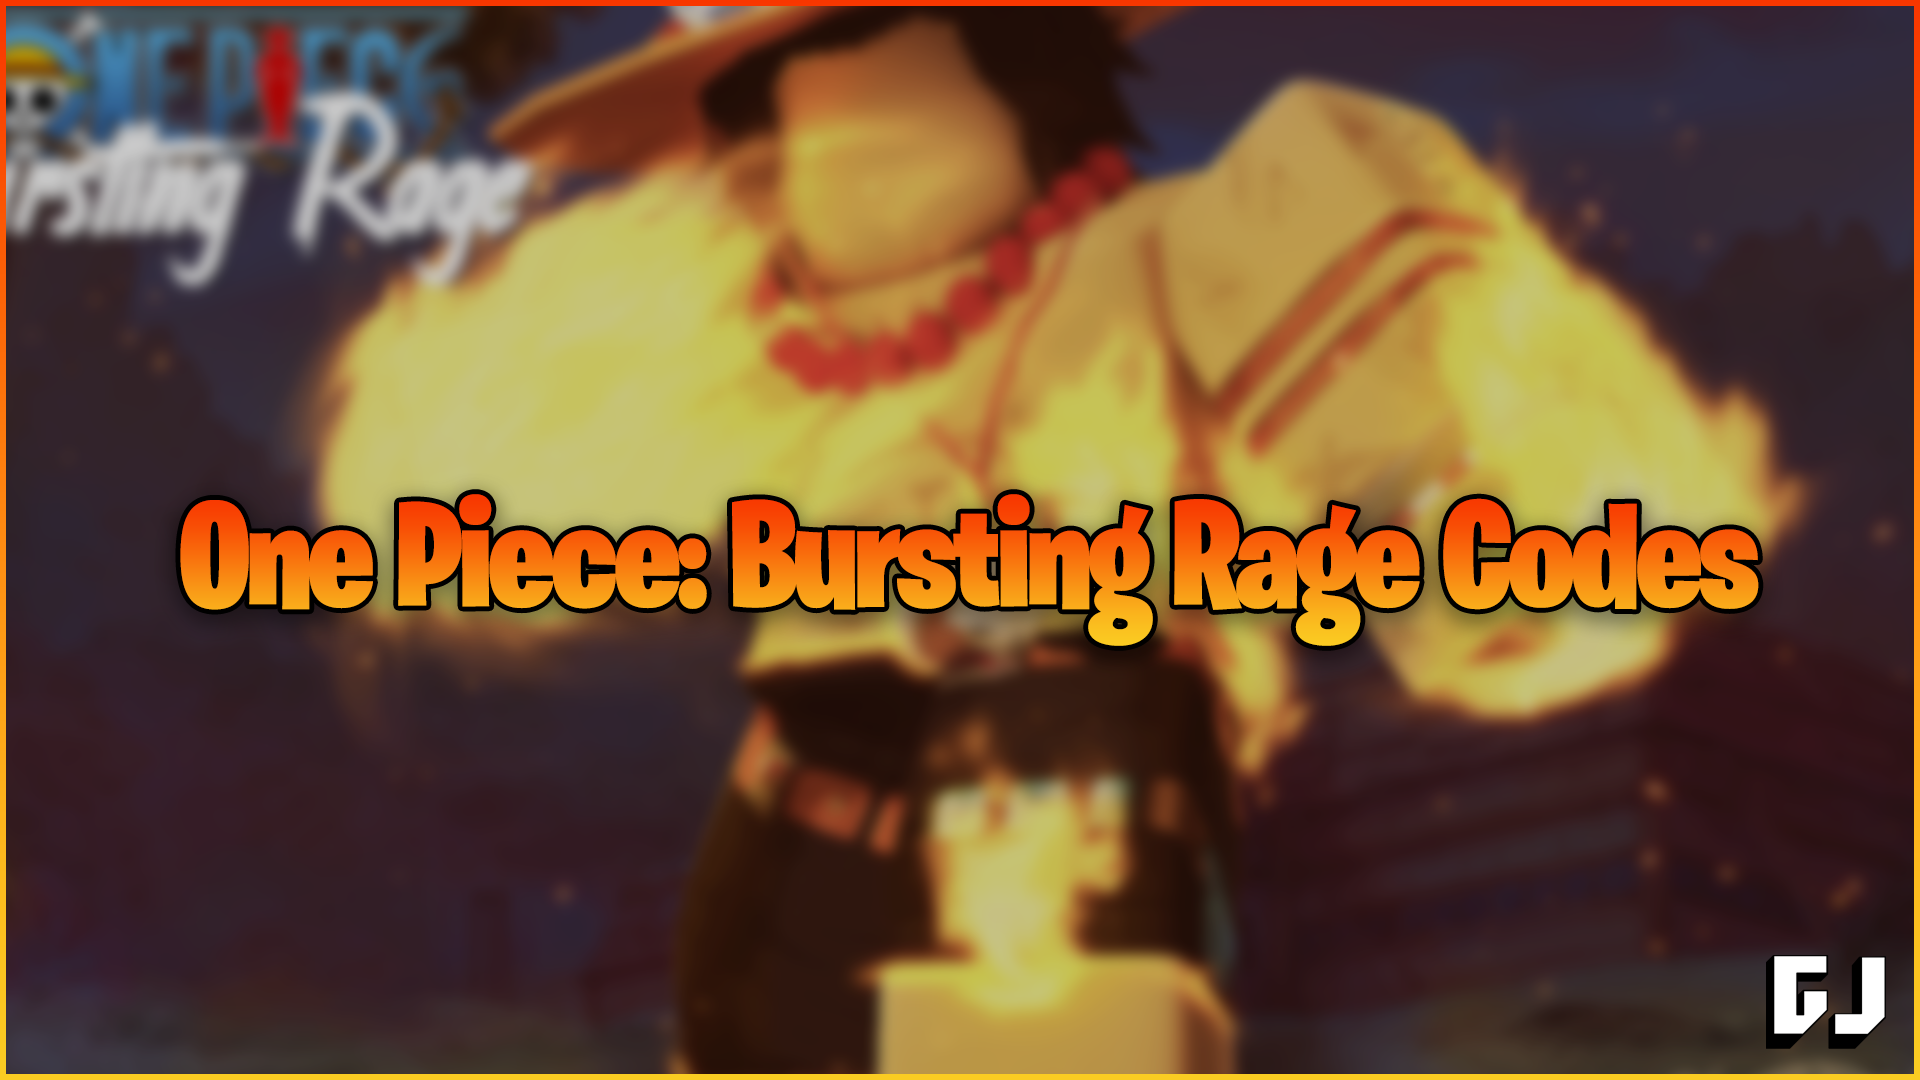 One Piece Bursting Rage codes – stat resets and beli